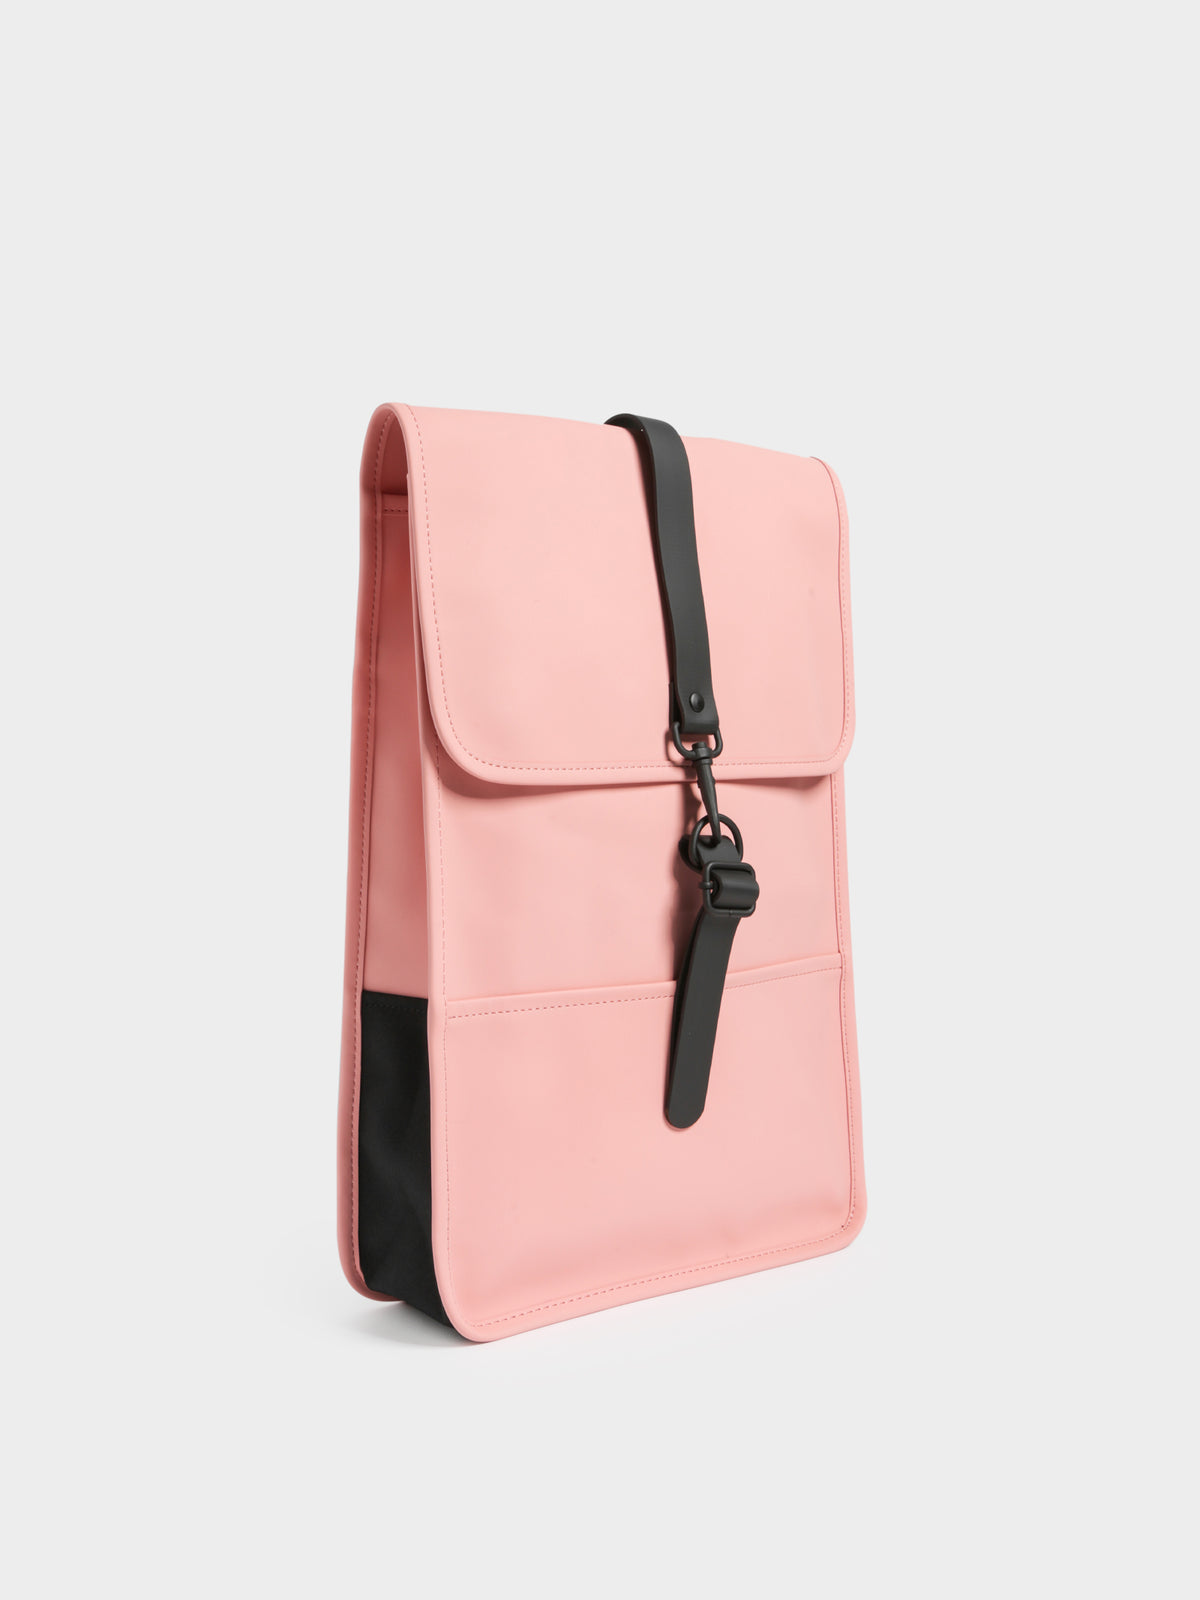 Backpack Mini in Coral